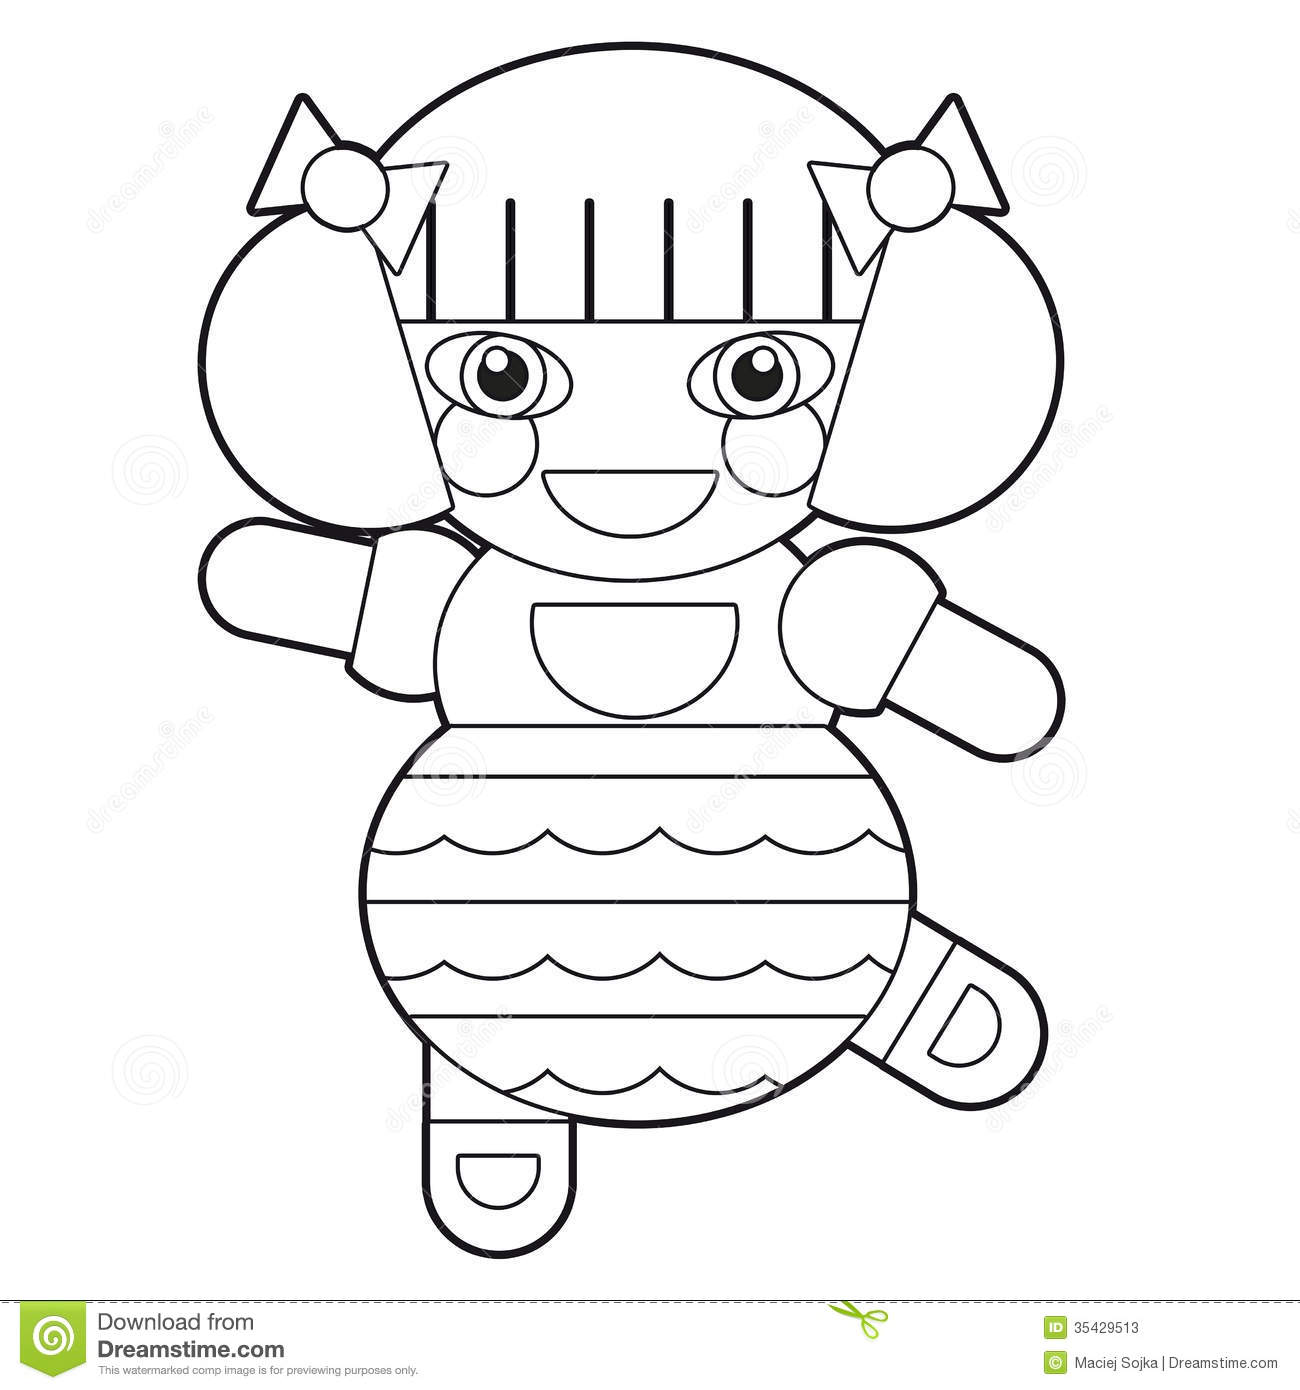 Cartoon Girl   Doll   Coloring Page   Illustration For The Children